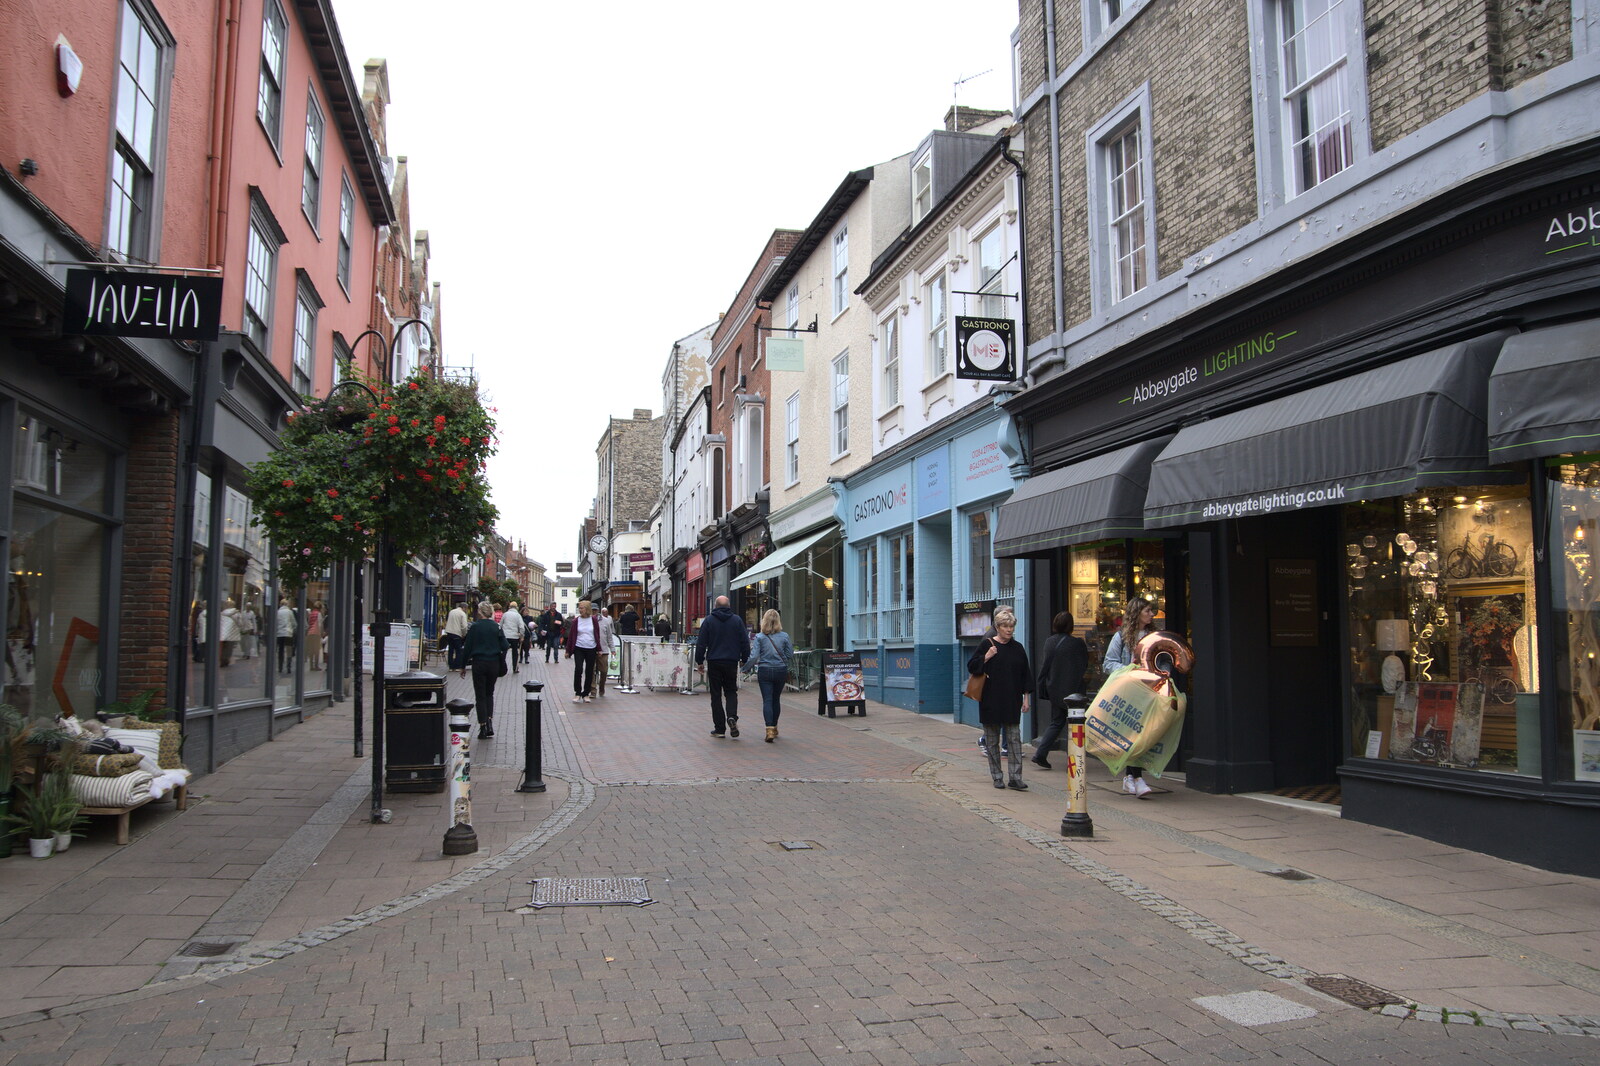 Abbeygate Street in Bury from St. Edmundsbury Cathedral, Bury St. Edmunds, Suffolk - 14th October 2022